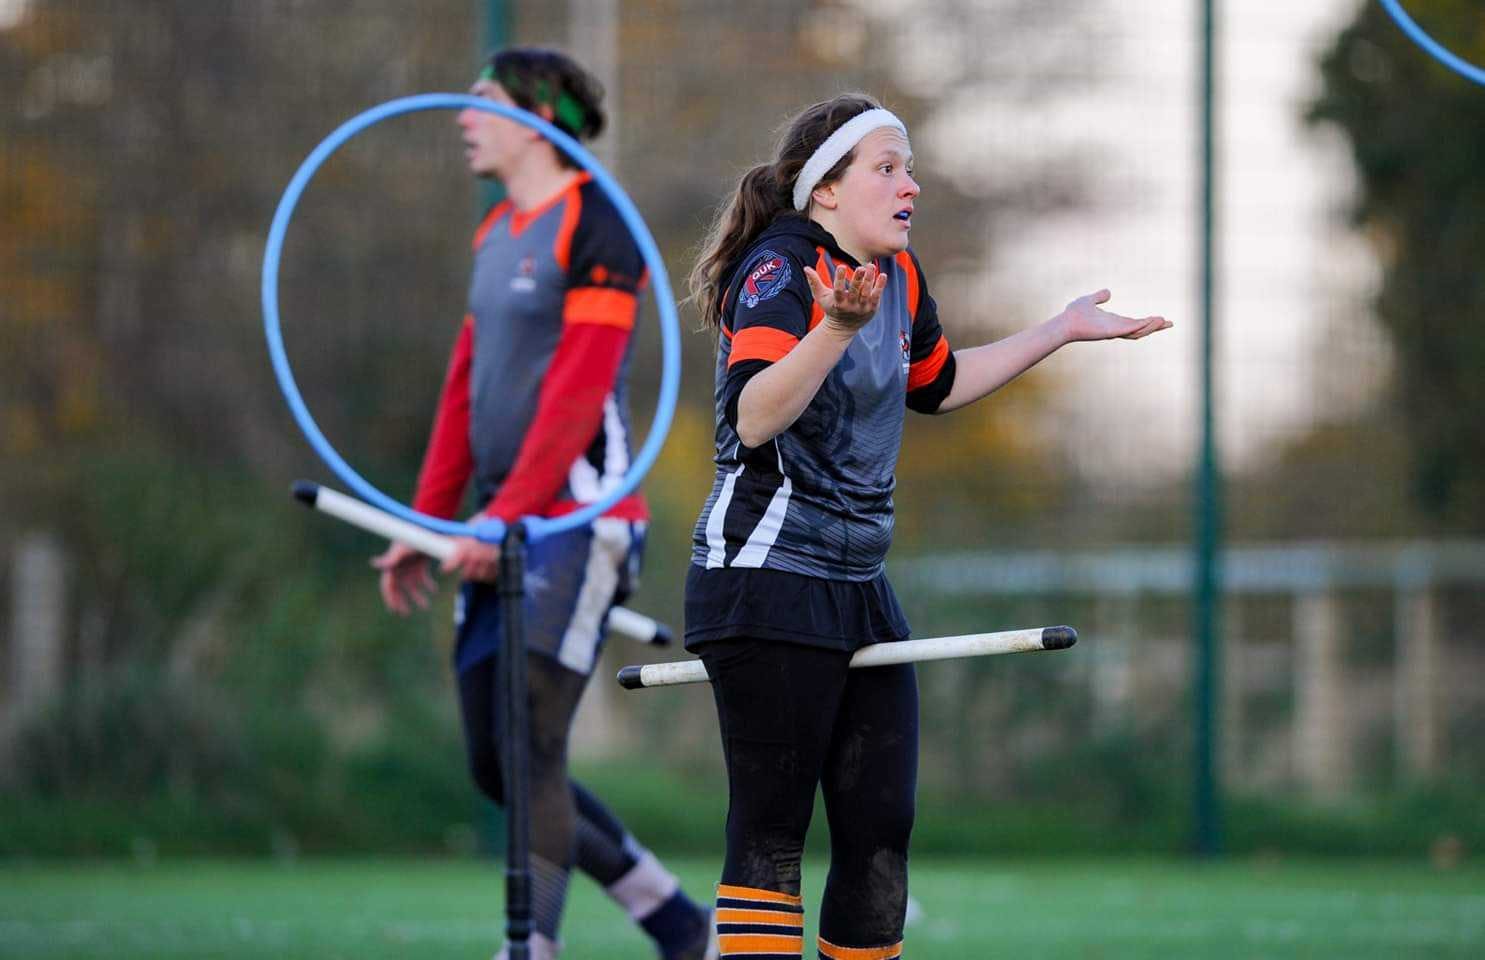 Fran Morris shrugs on broom during a match